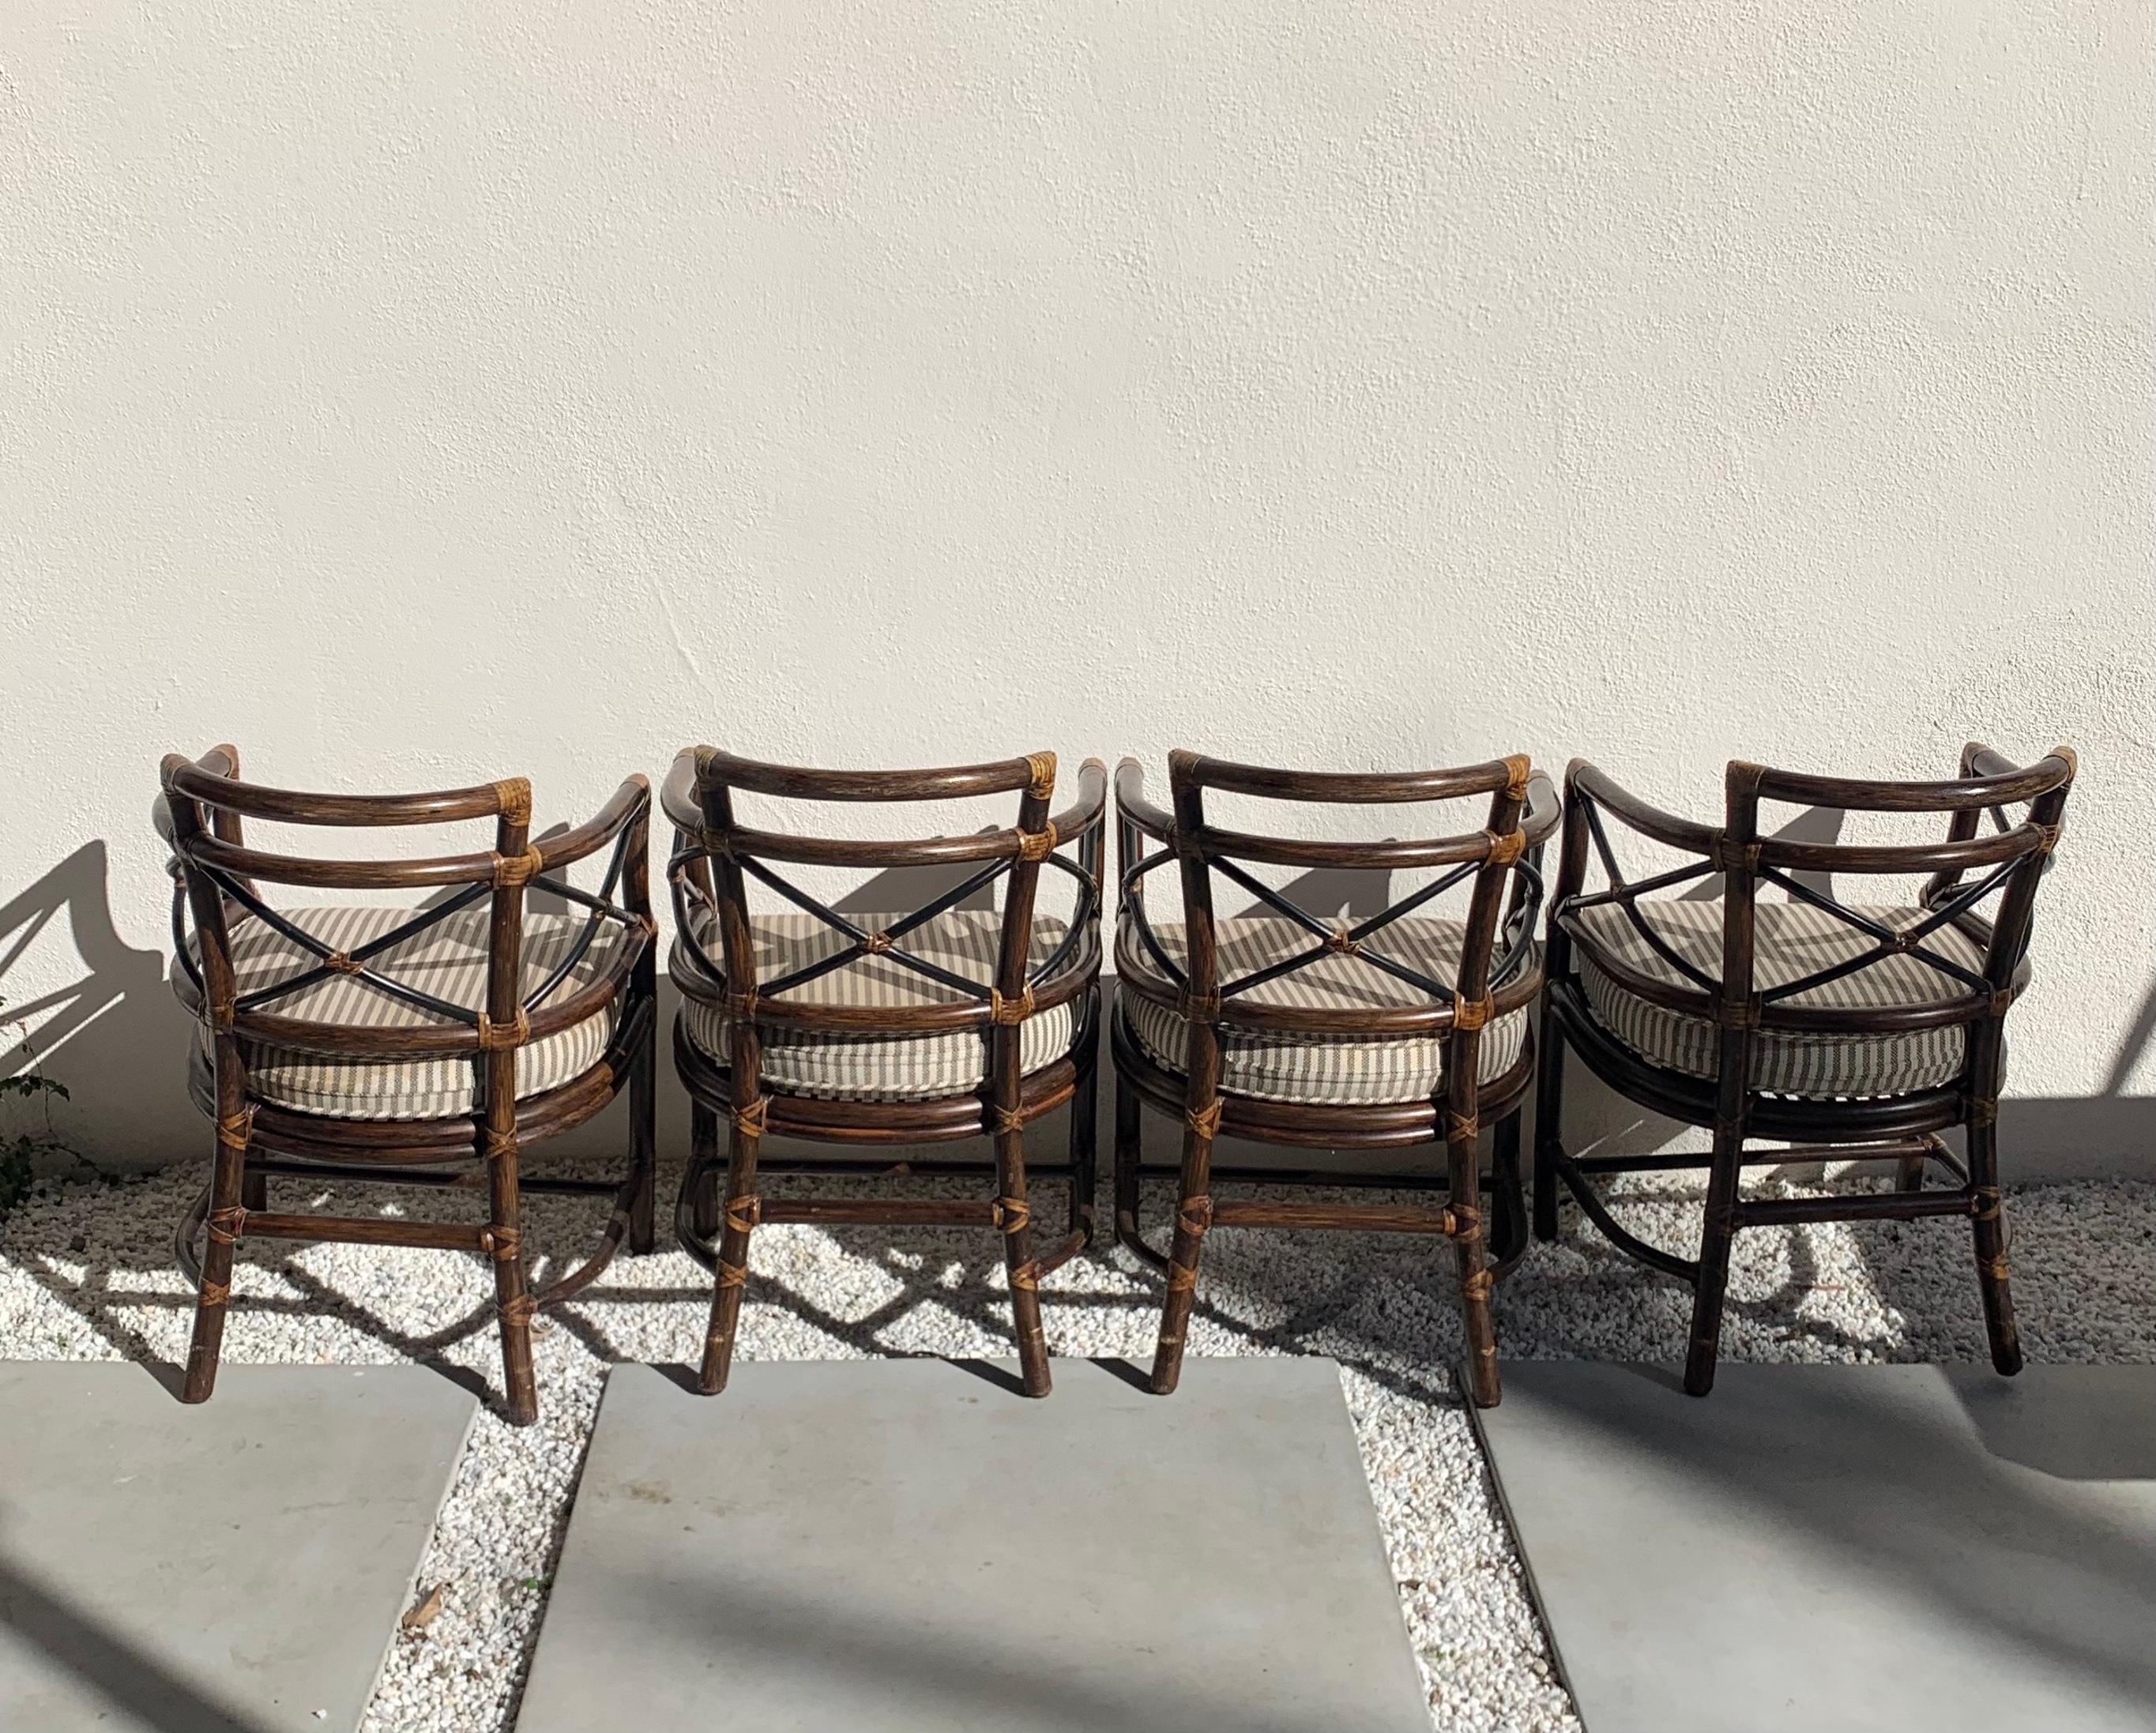 Set of 4 rattan chairs with striped upholstered cushions by McGuire. Made in the Philippines 1960s. Imported via San Francisco. Rattan is in excellent condition; cushions show very minor signs of age - see photos.